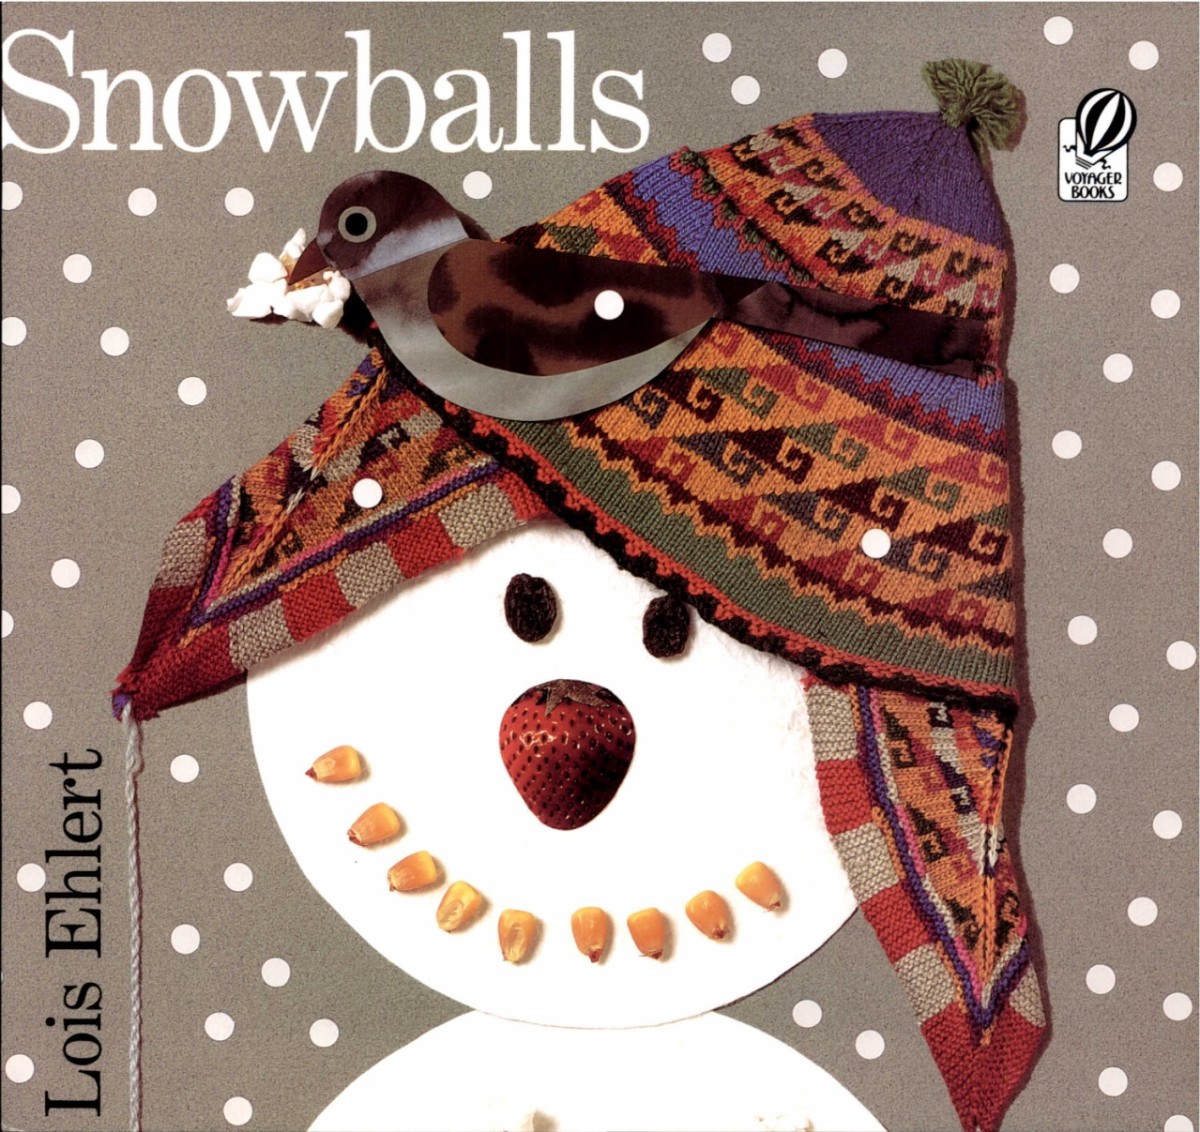 Snowballs by artist/writer Lois Ehlert is a classic winter collage storybook with a simple storyline and lots of fun collage pictures made from quirky objects.